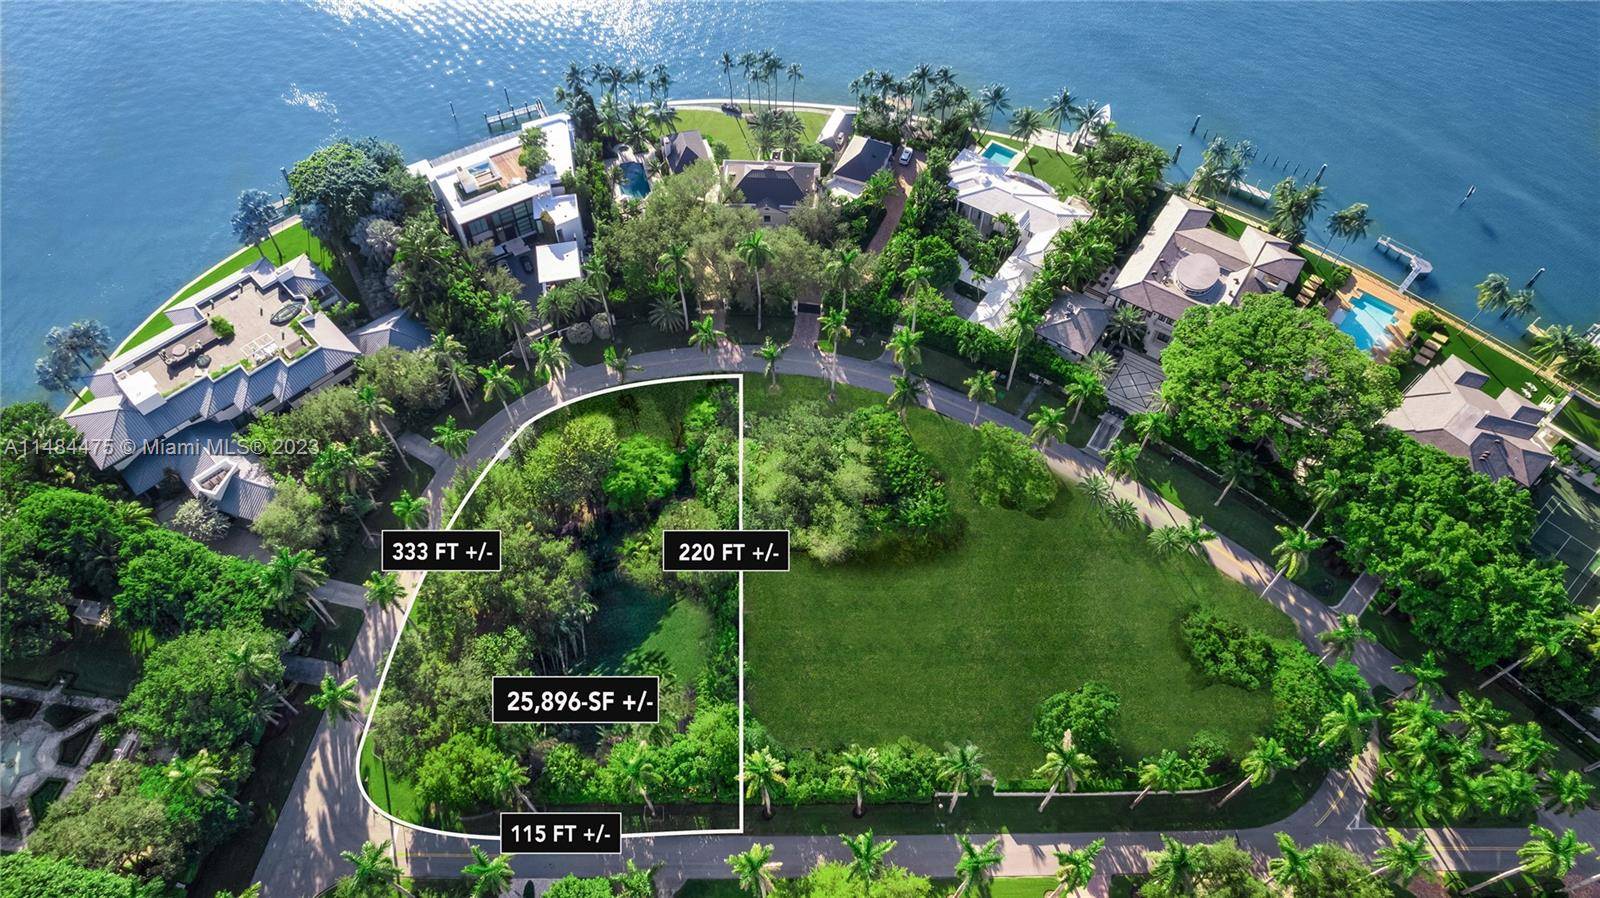 Envision an exquisite, single story contemporary masterpiece nestled on this expansive 25, 896 SF lot within the prestigious and guarded enclave of La Gorce Island in Miami Beach.